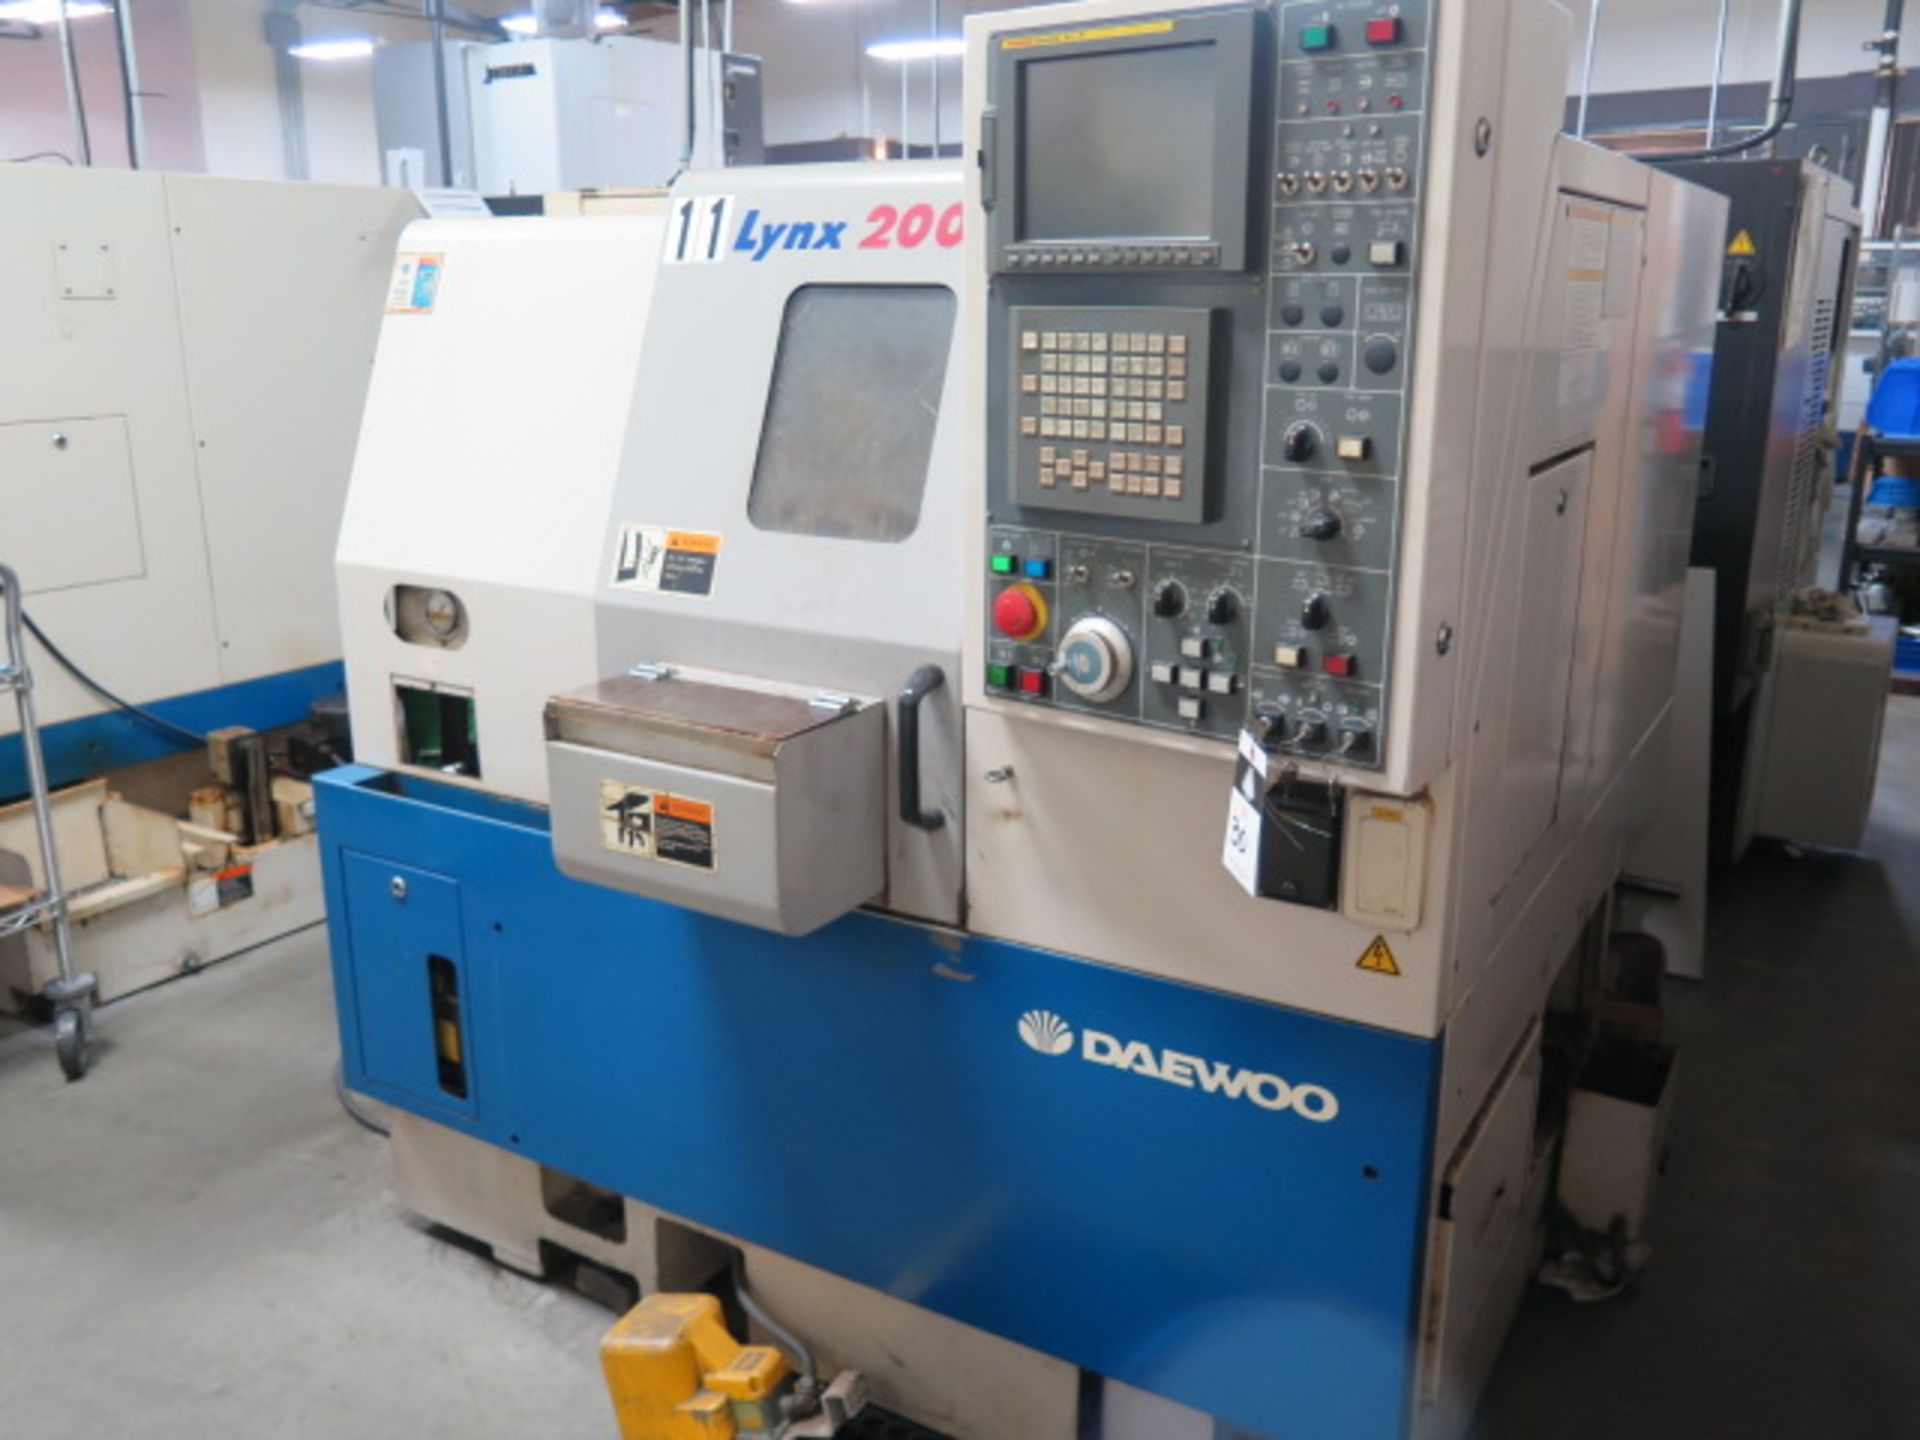 2000 Daewoo LYNX 200B CNC Turning Center s/n L2001751 w/ Fanuc Series 21i-T Controls, SOLD AS IS - Image 2 of 14